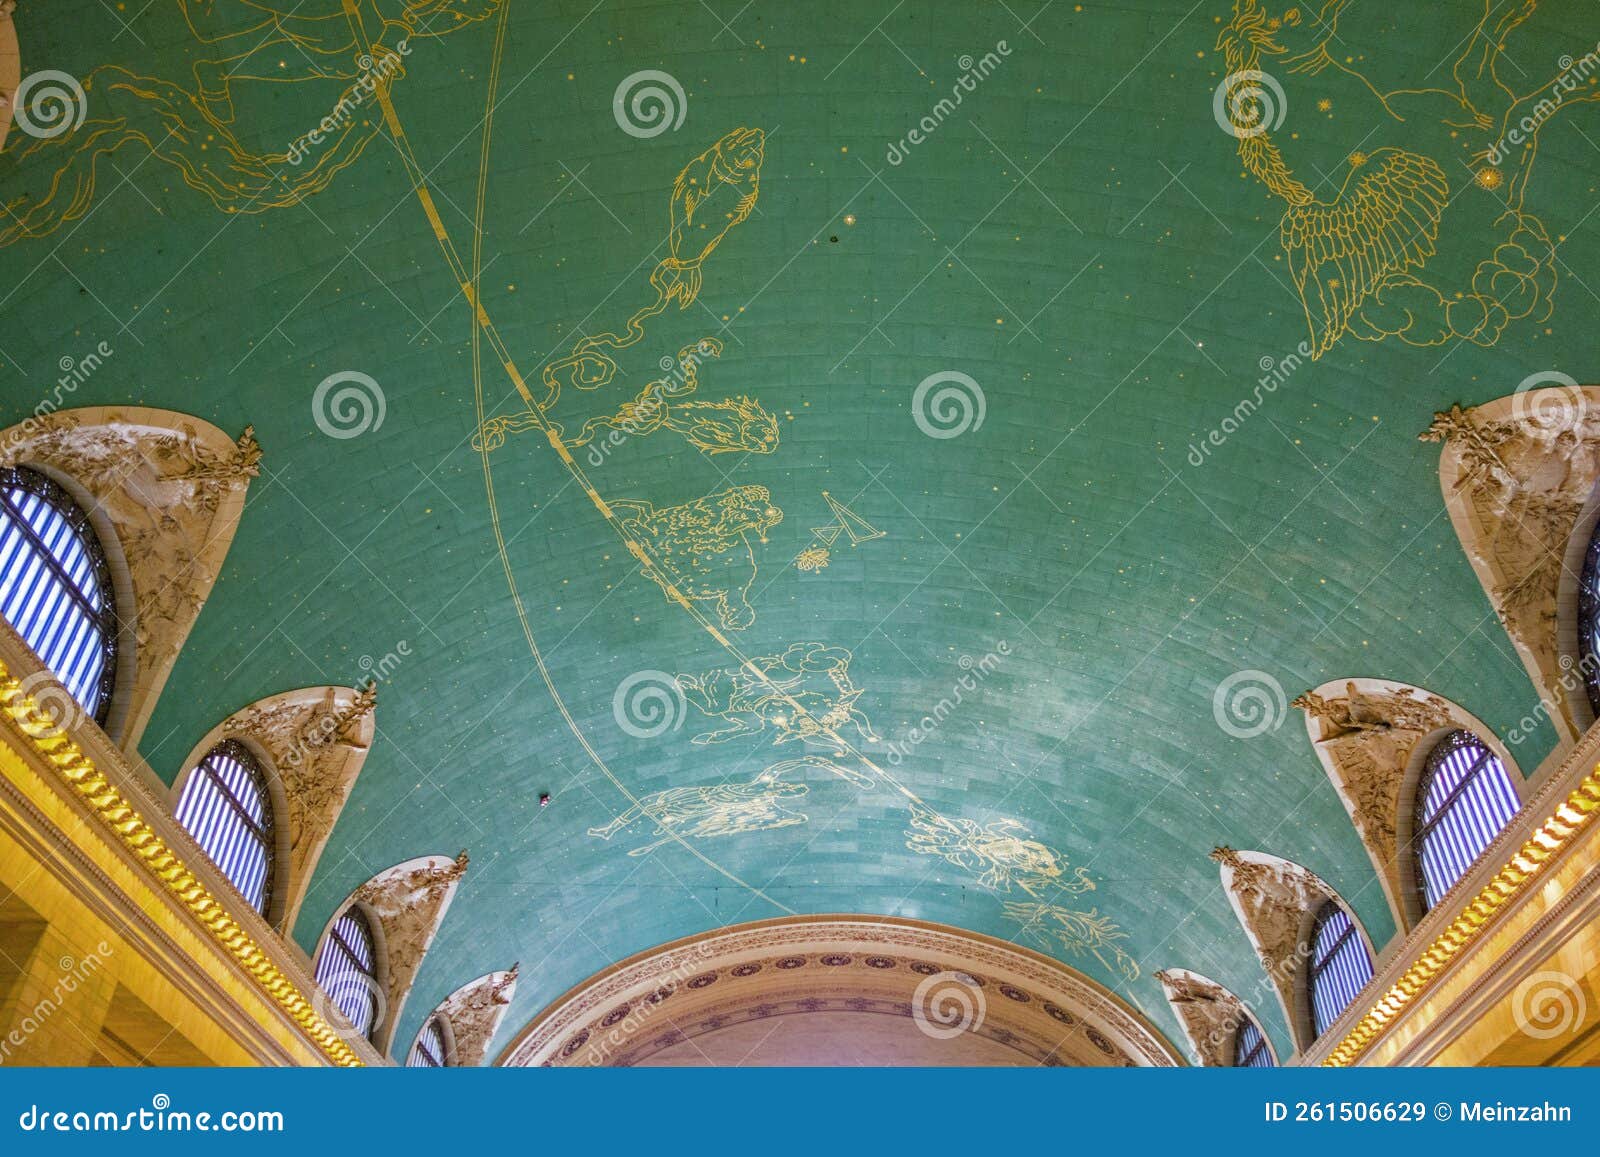 star-sign-painted-at-the-ceiling-of-grand-central-in-new-york-editorial